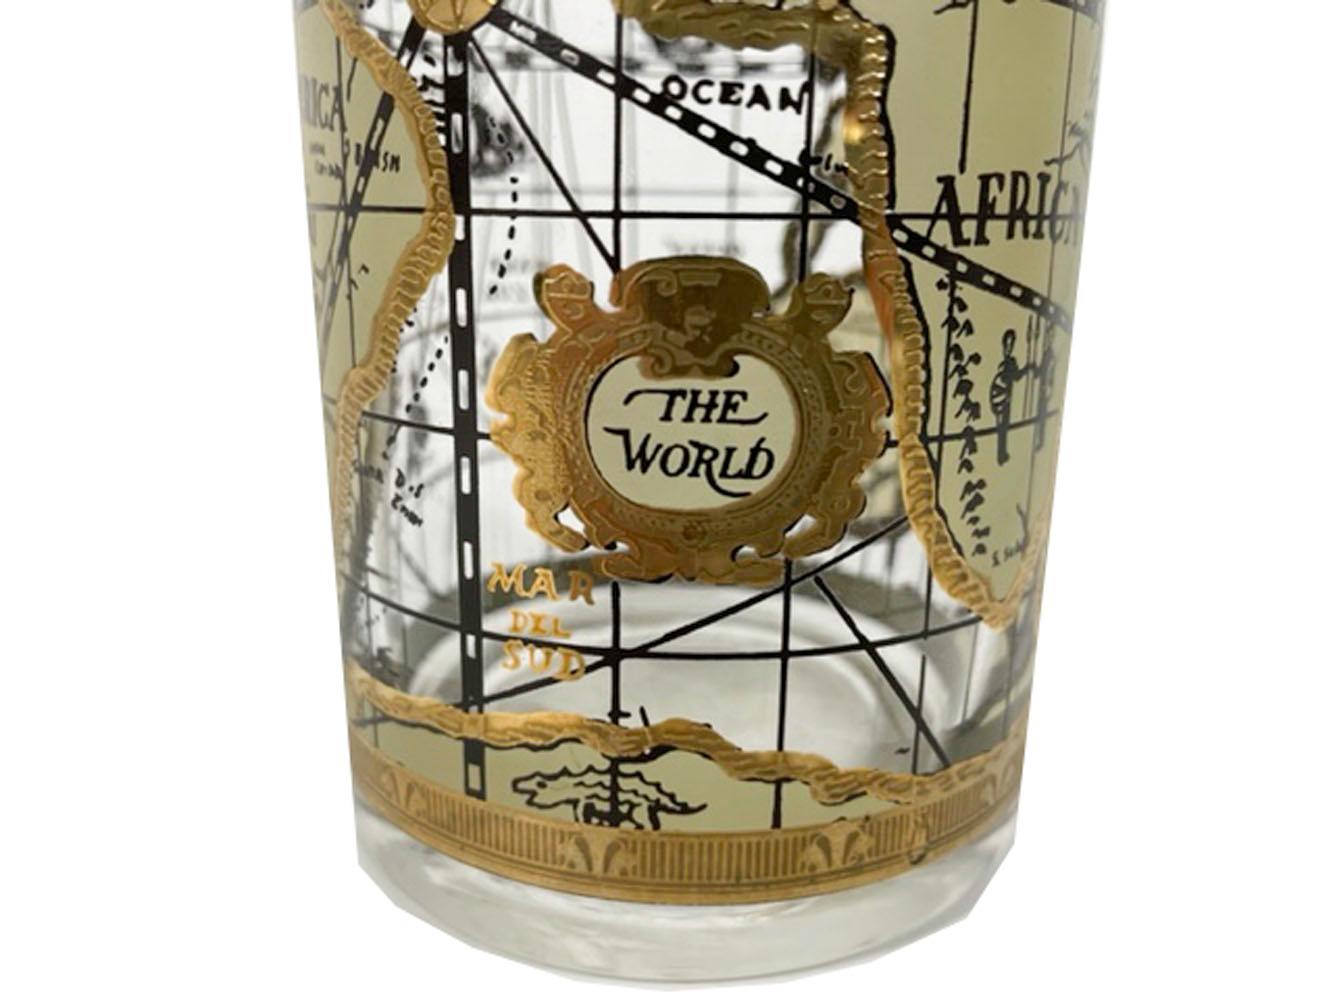 Vintage cocktail pitcher by Cera in the Old World Map pattern, with a map designed to look like an antique map on parchment in tans and 22k gold.

We have multiple listings for the Old World Map pattern in other forms, some with multiple